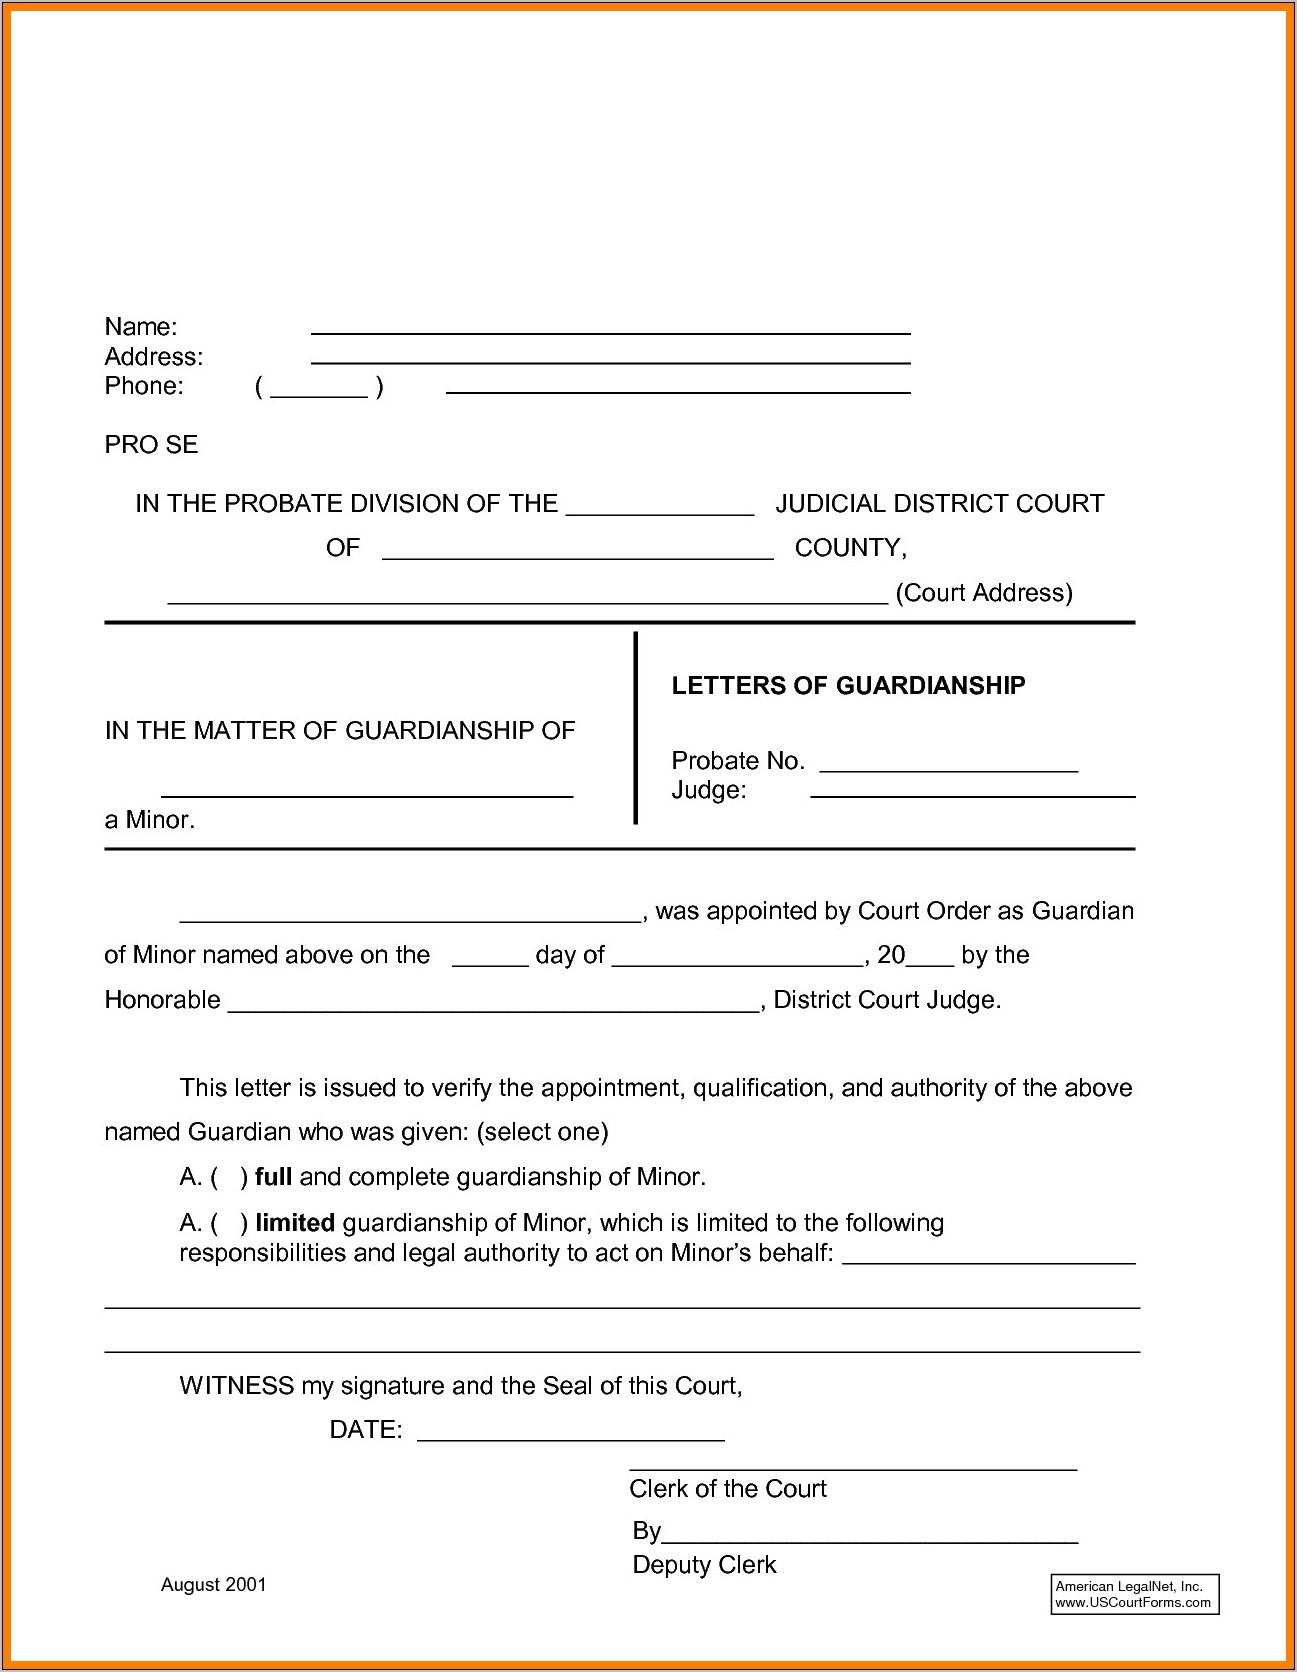 Temporary Guardianship Letter Template Free